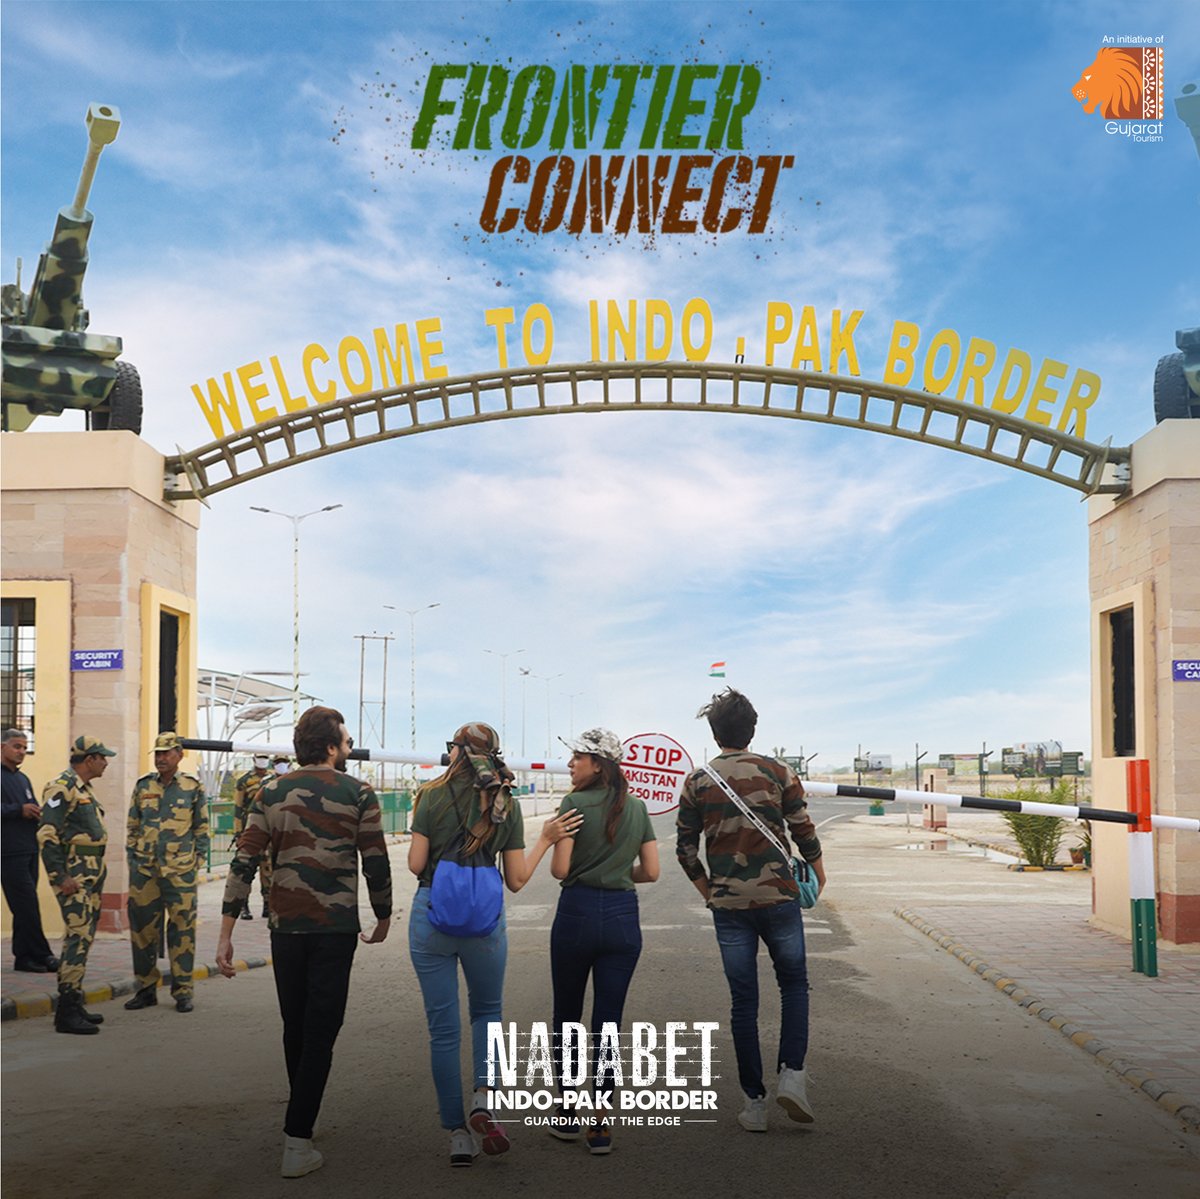 Experience the breathtaking view of the Zero-point at the Nadabet Indo-Pak border, where tranquillity and patriotism coexist. Visit to know more.

#frontierconnect #zeropoint #visitnadabet #IndoPakBorder #NadabetBorder #Gujarat #gujarattourism #exploregujarat #incredibleindia